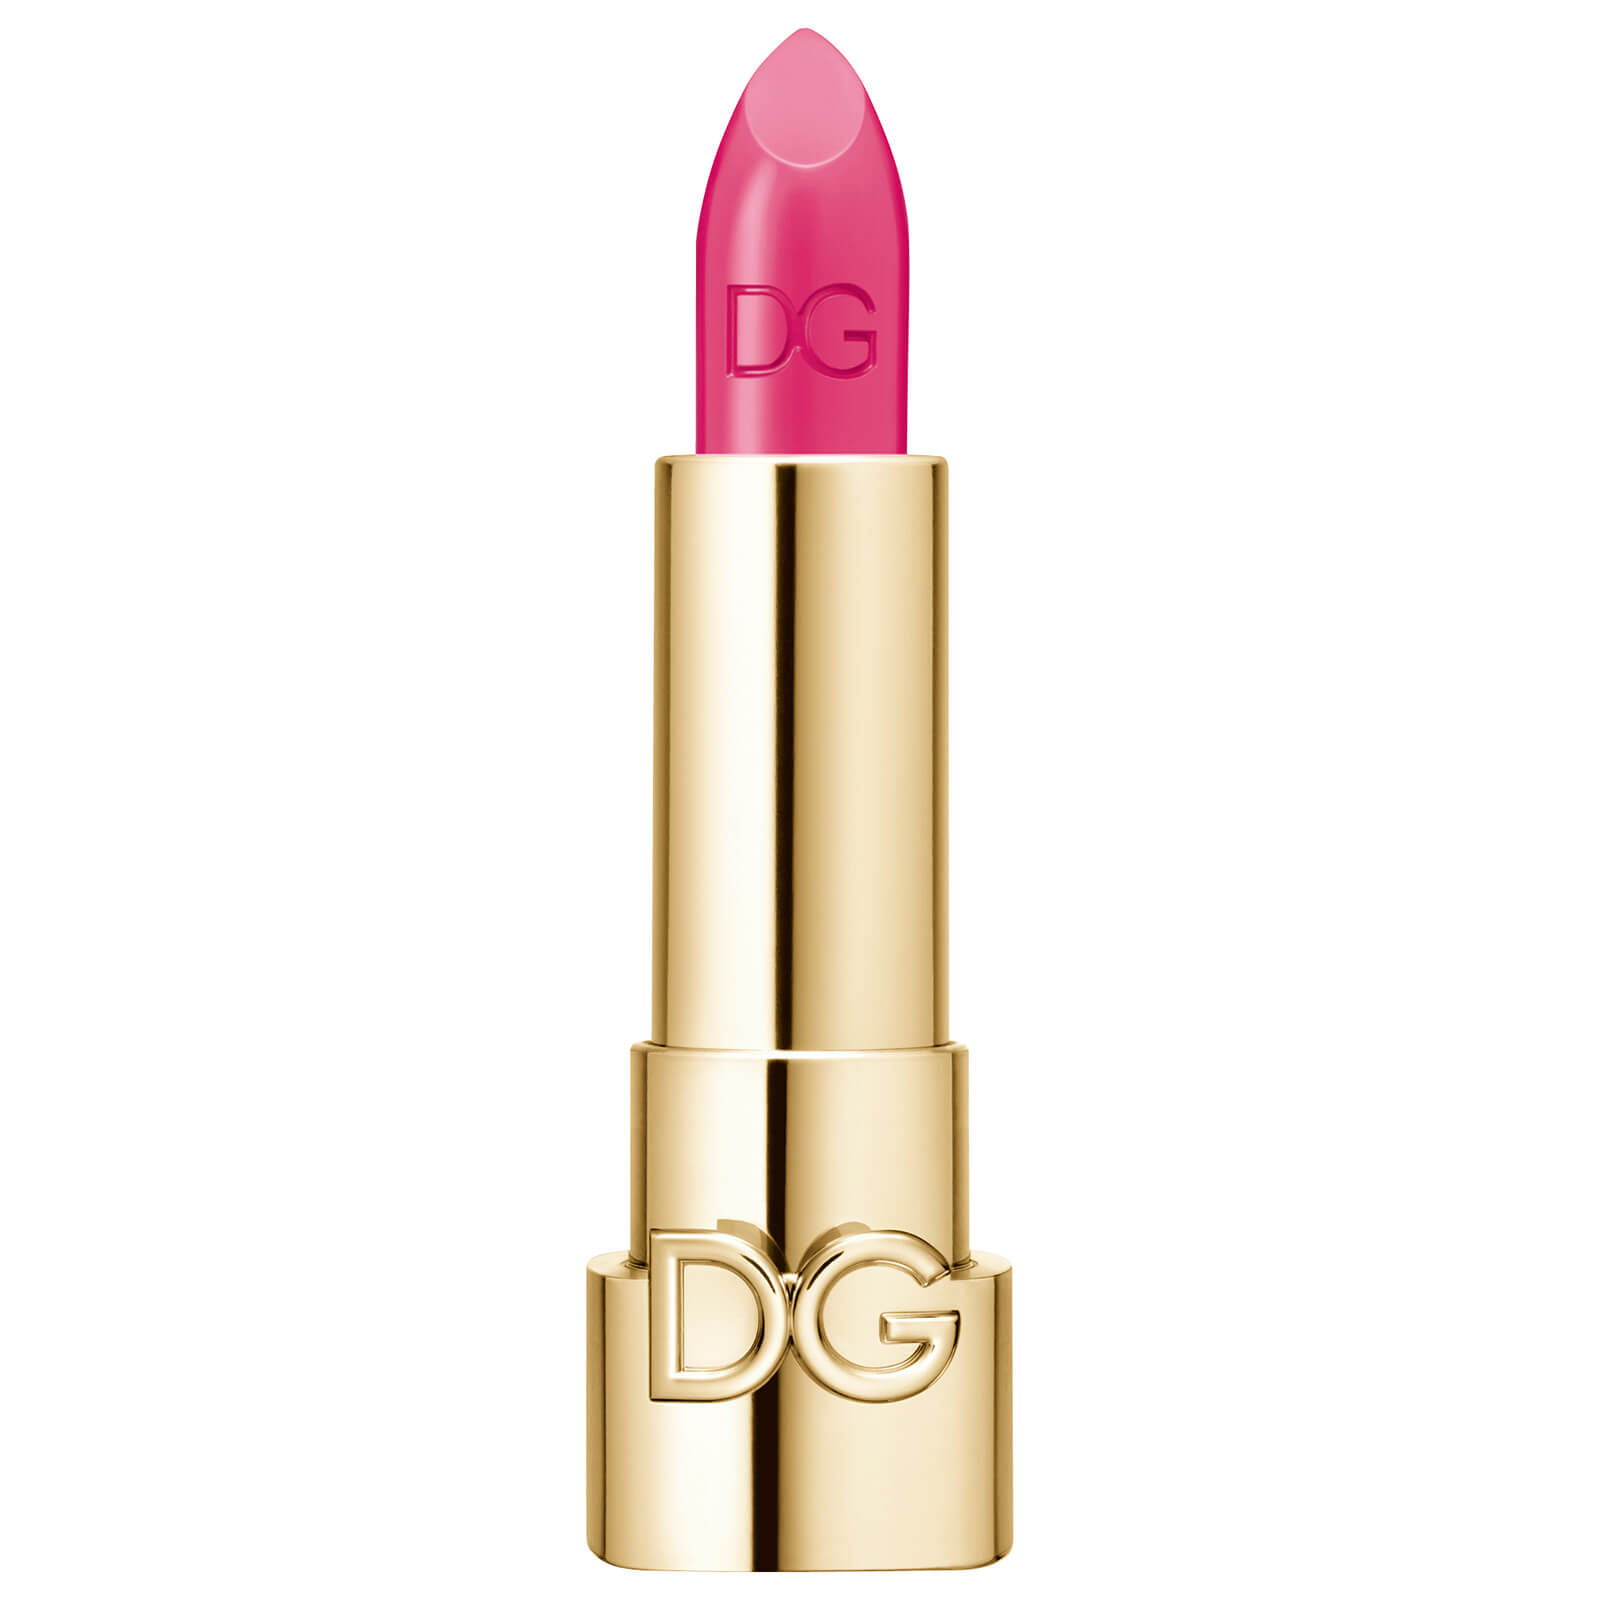 Dolce&Gabbana The Only One Lipstick 1.7g (No Cap) (Various Shades) - 290 Sensual Orchid